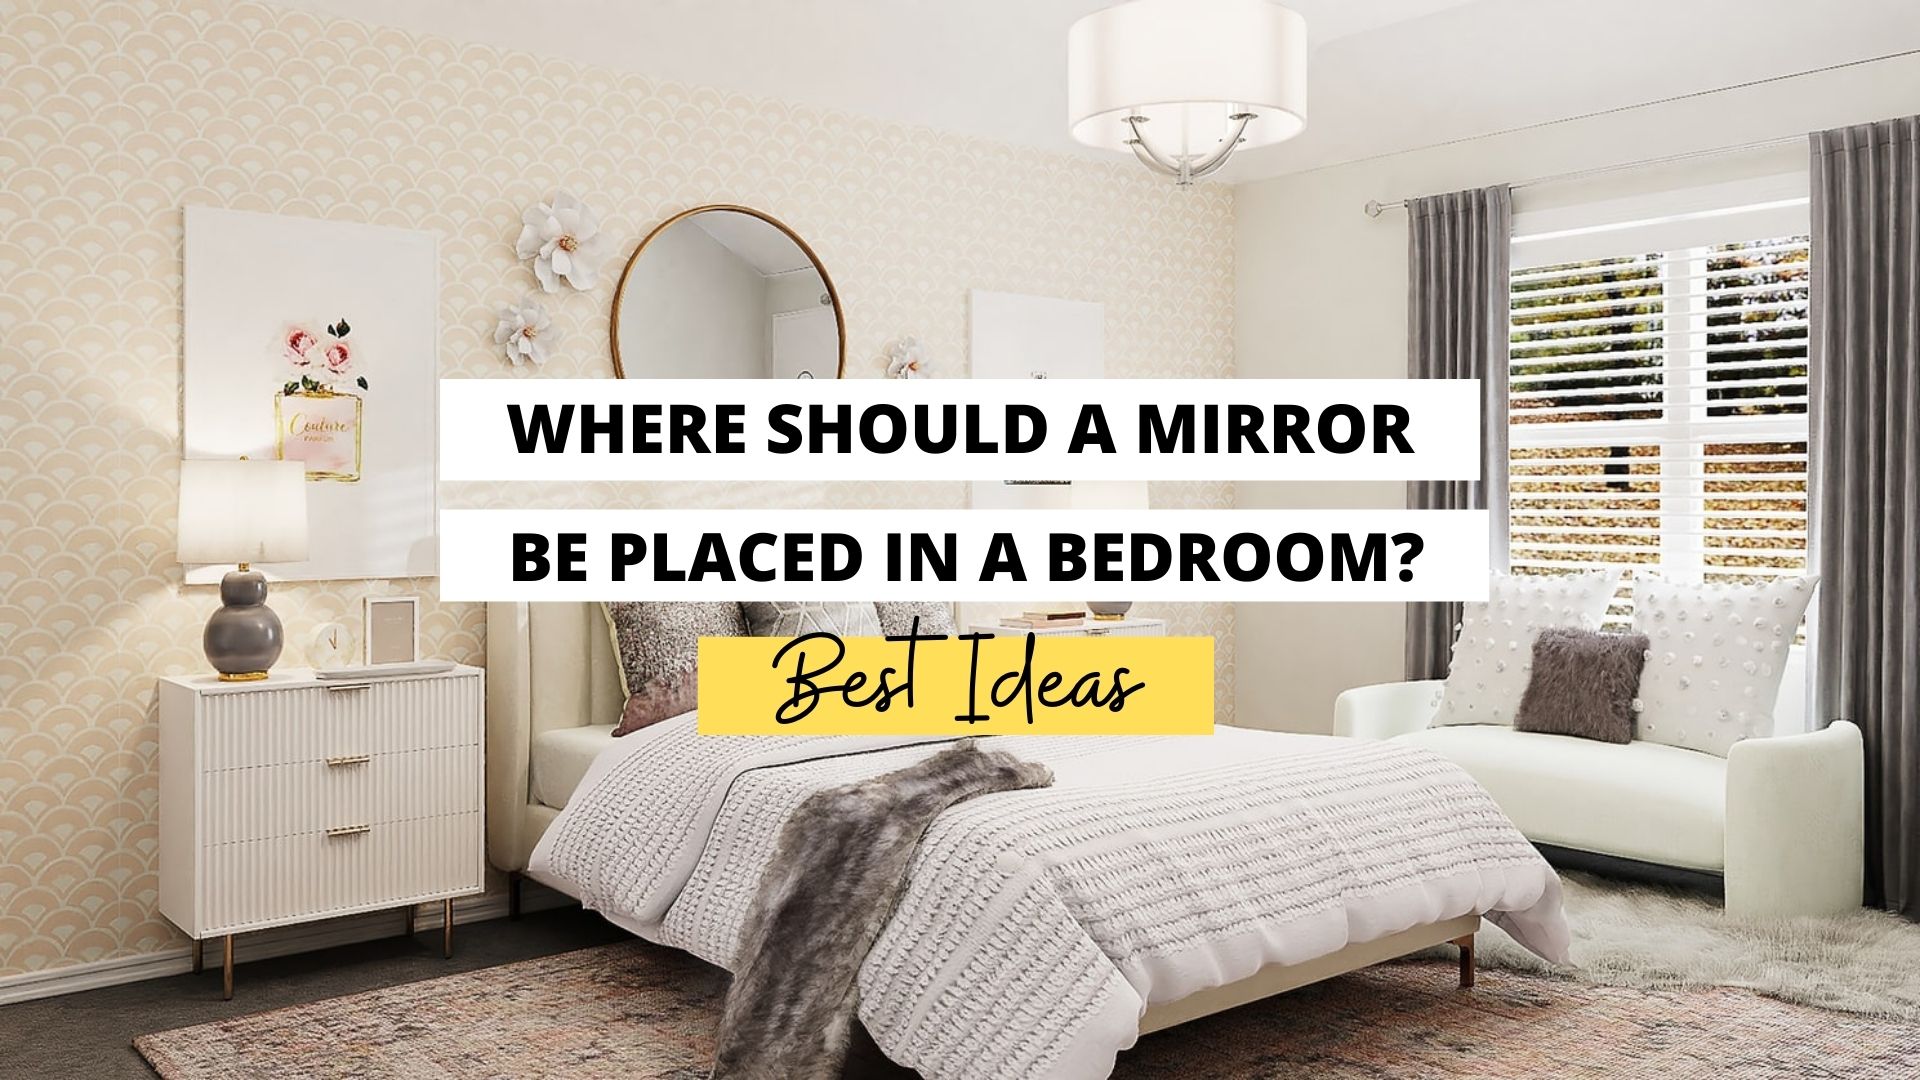 A Mirror Be Placed In Bedroom, Where Should A Mirror Be Placed In The Bedroom